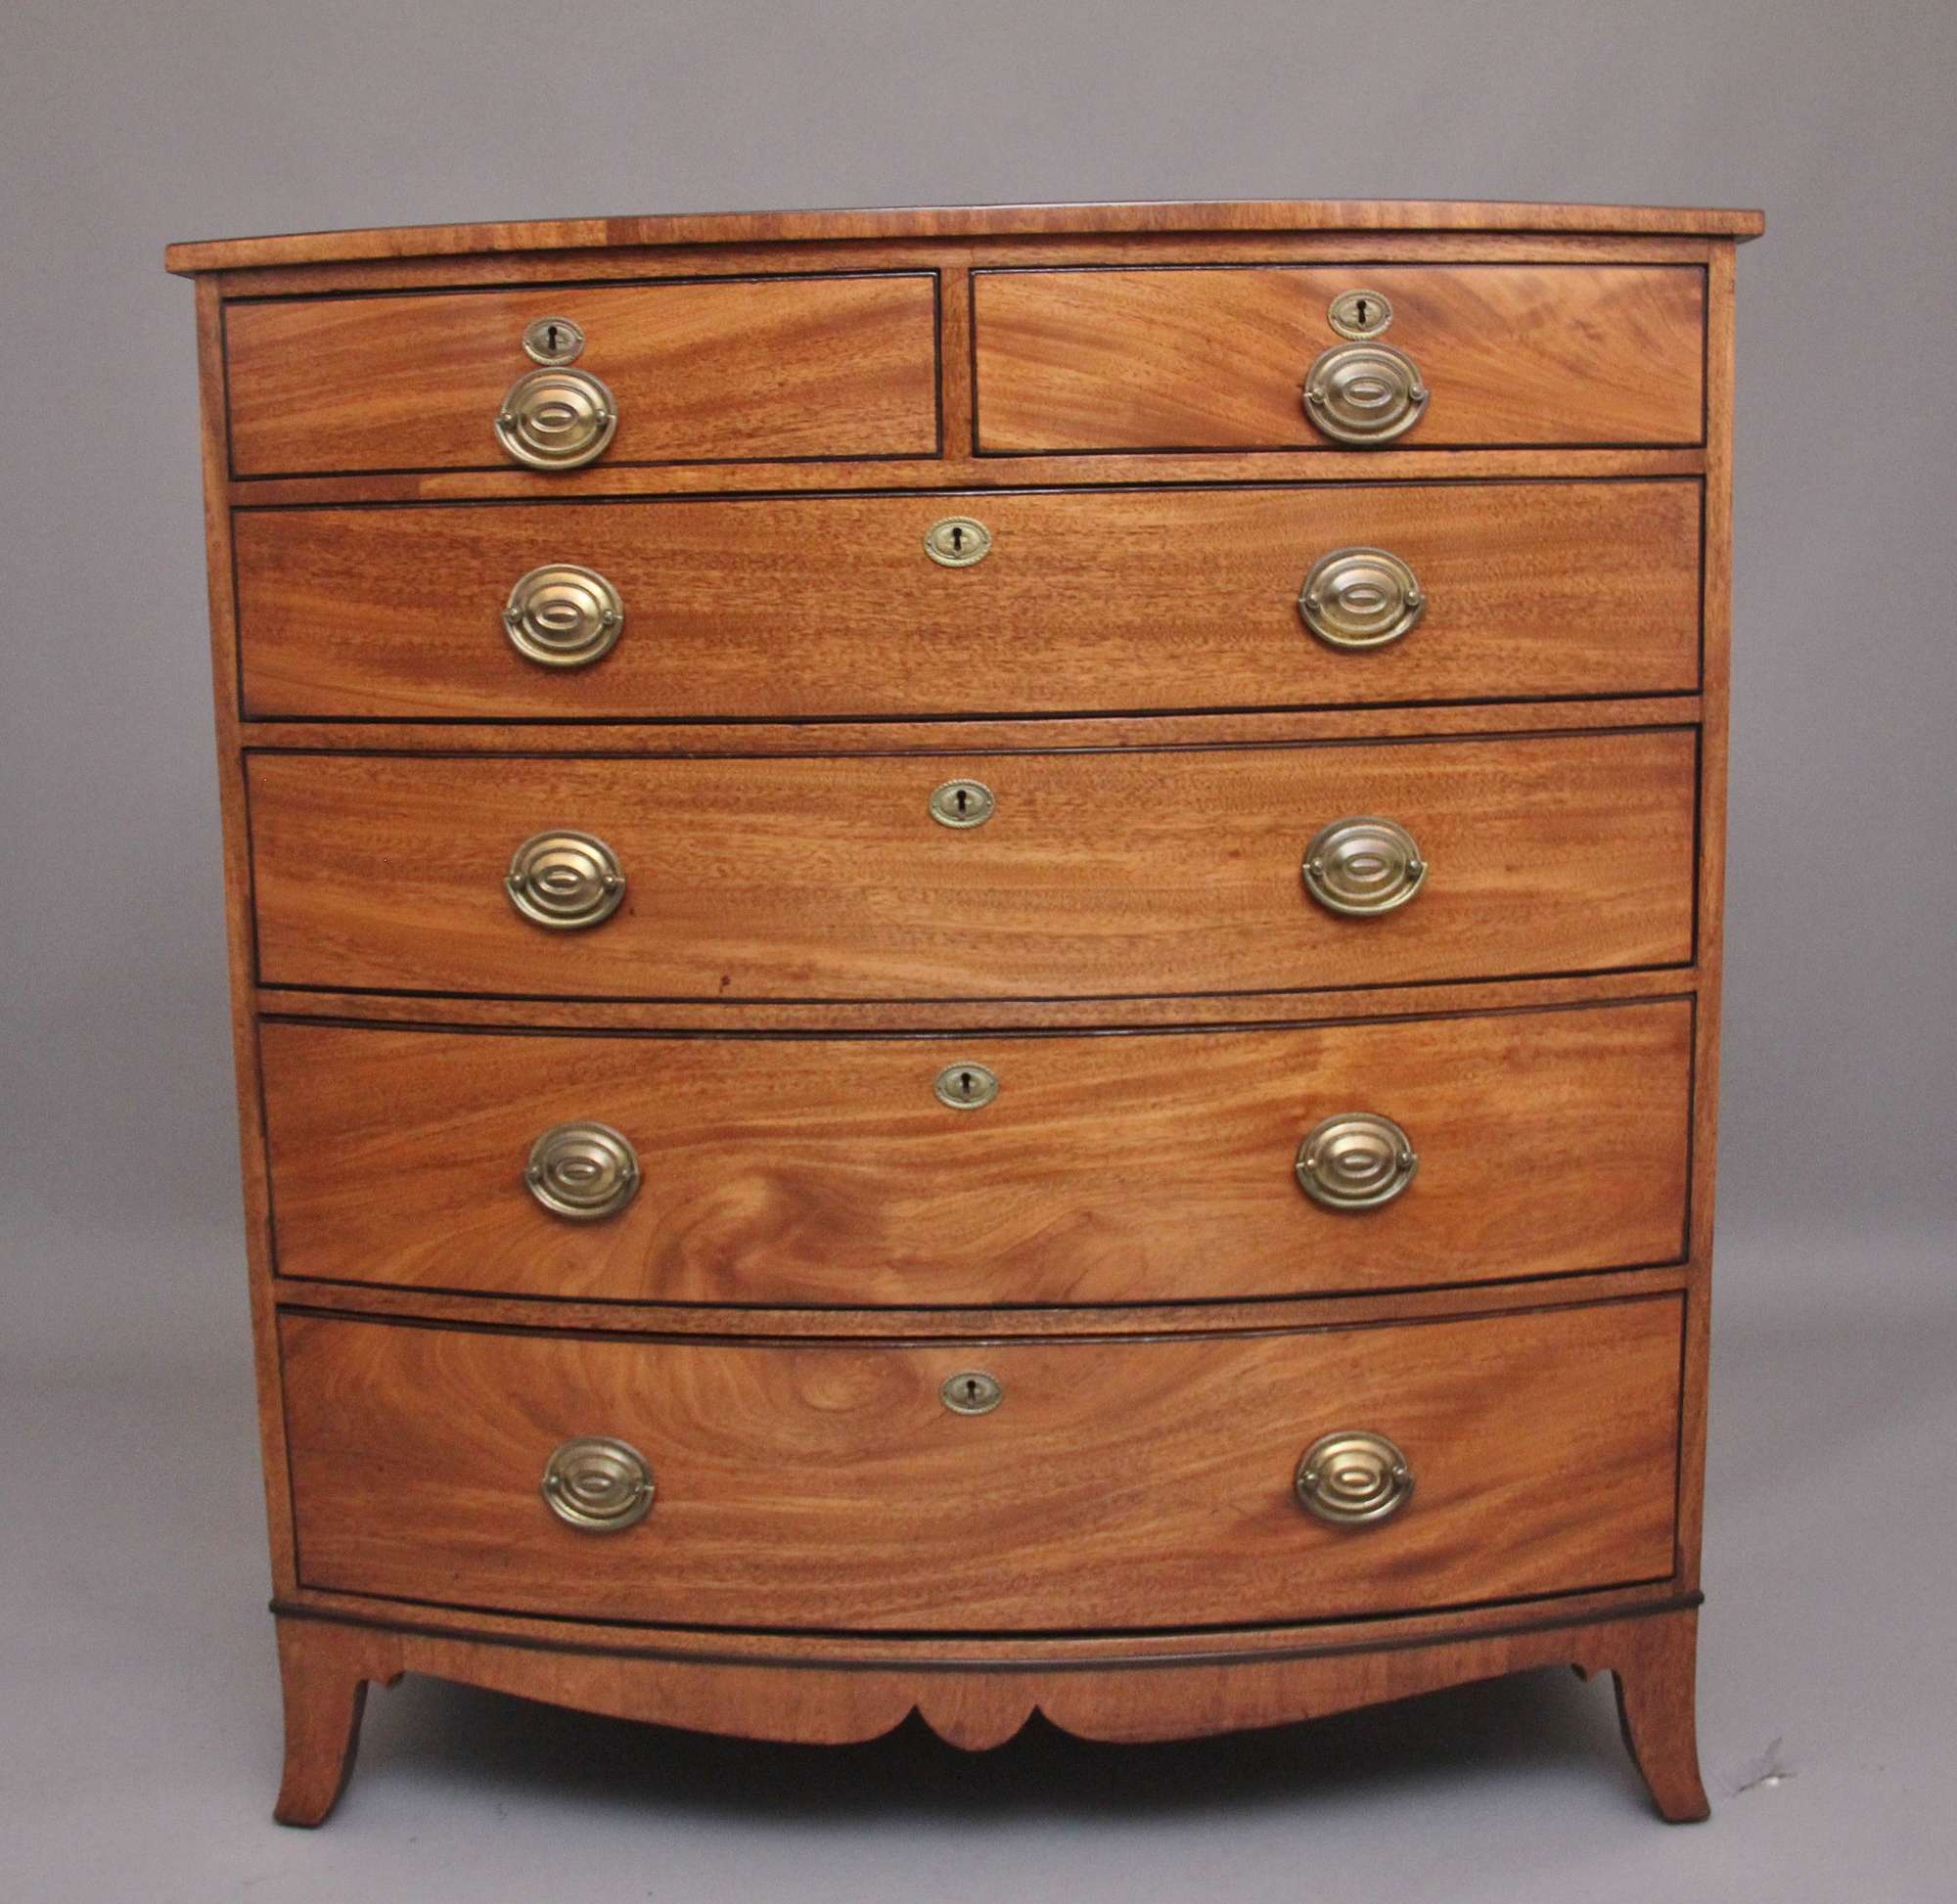 A Superb Quality Early 19th Century Tall Mahogany Bowfront Antique Chest Of Drawers